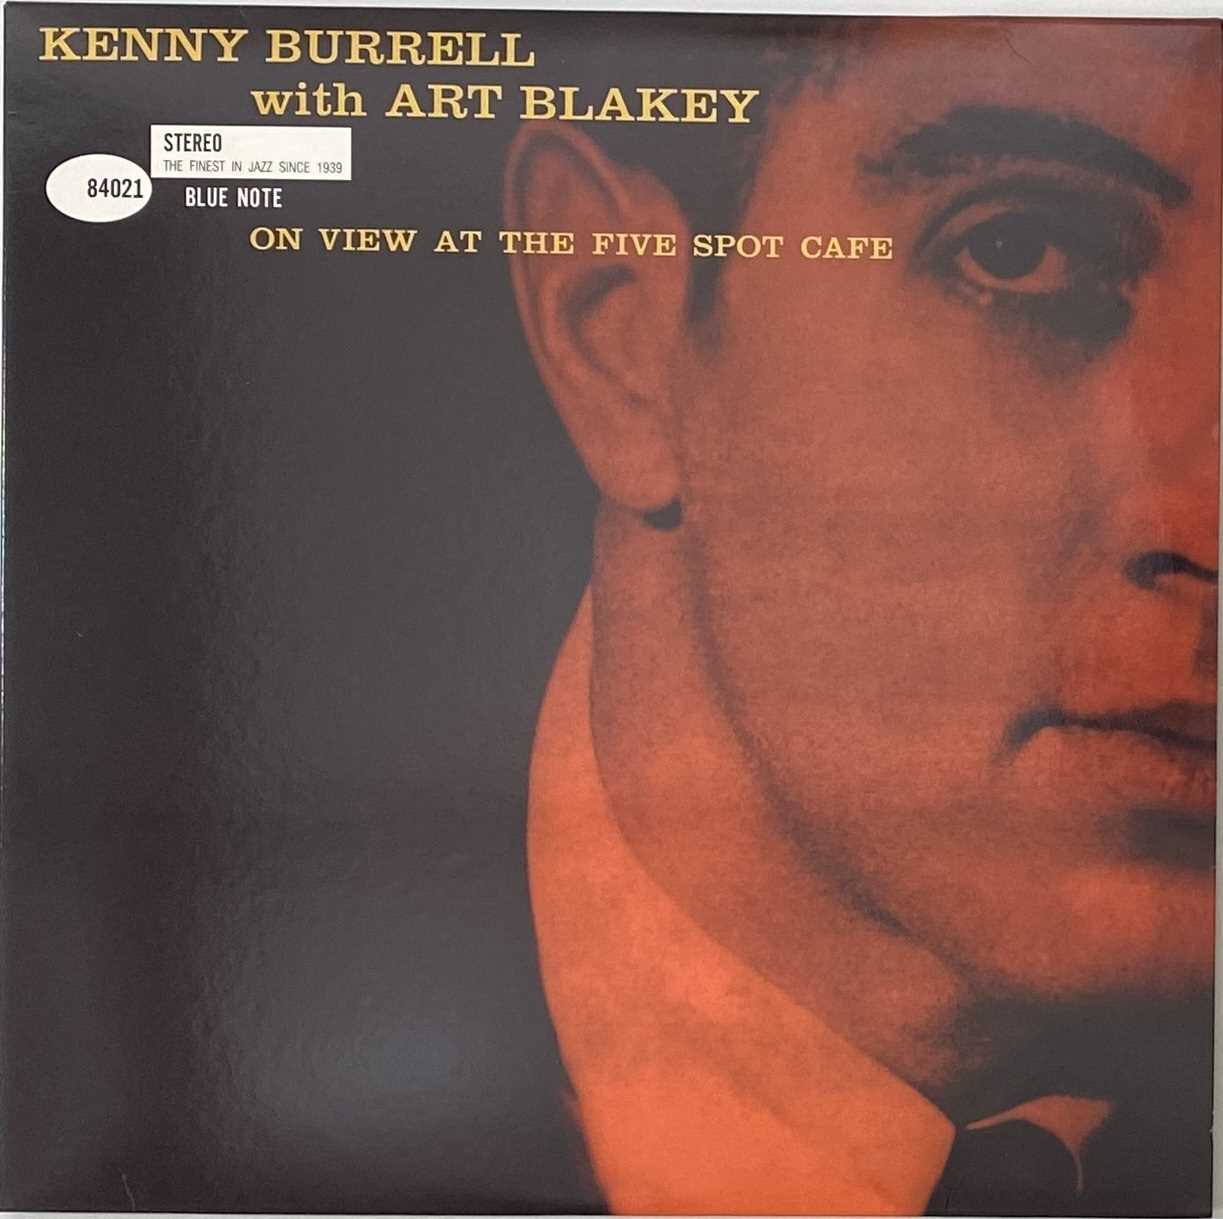 KENNY BURRELL WITH ART BLAKEY - ON VIEW AT THE FIVE SPOT CAFE LP (2010 LTD EDITION PRESSING - 509996 - Image 2 of 8